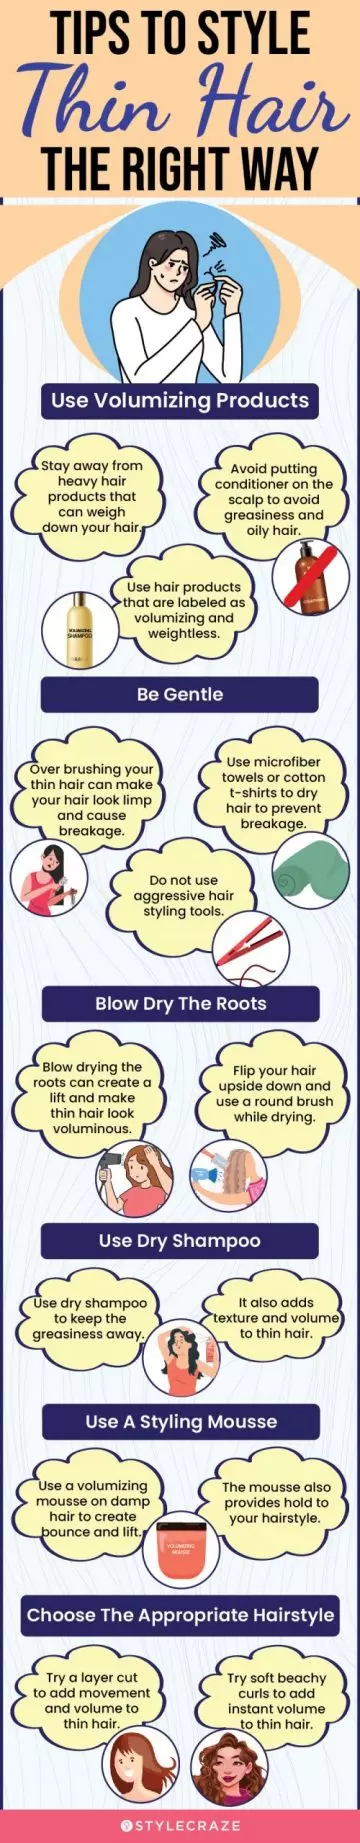 Tips To Style Thin Hair The Right Way (infographic)